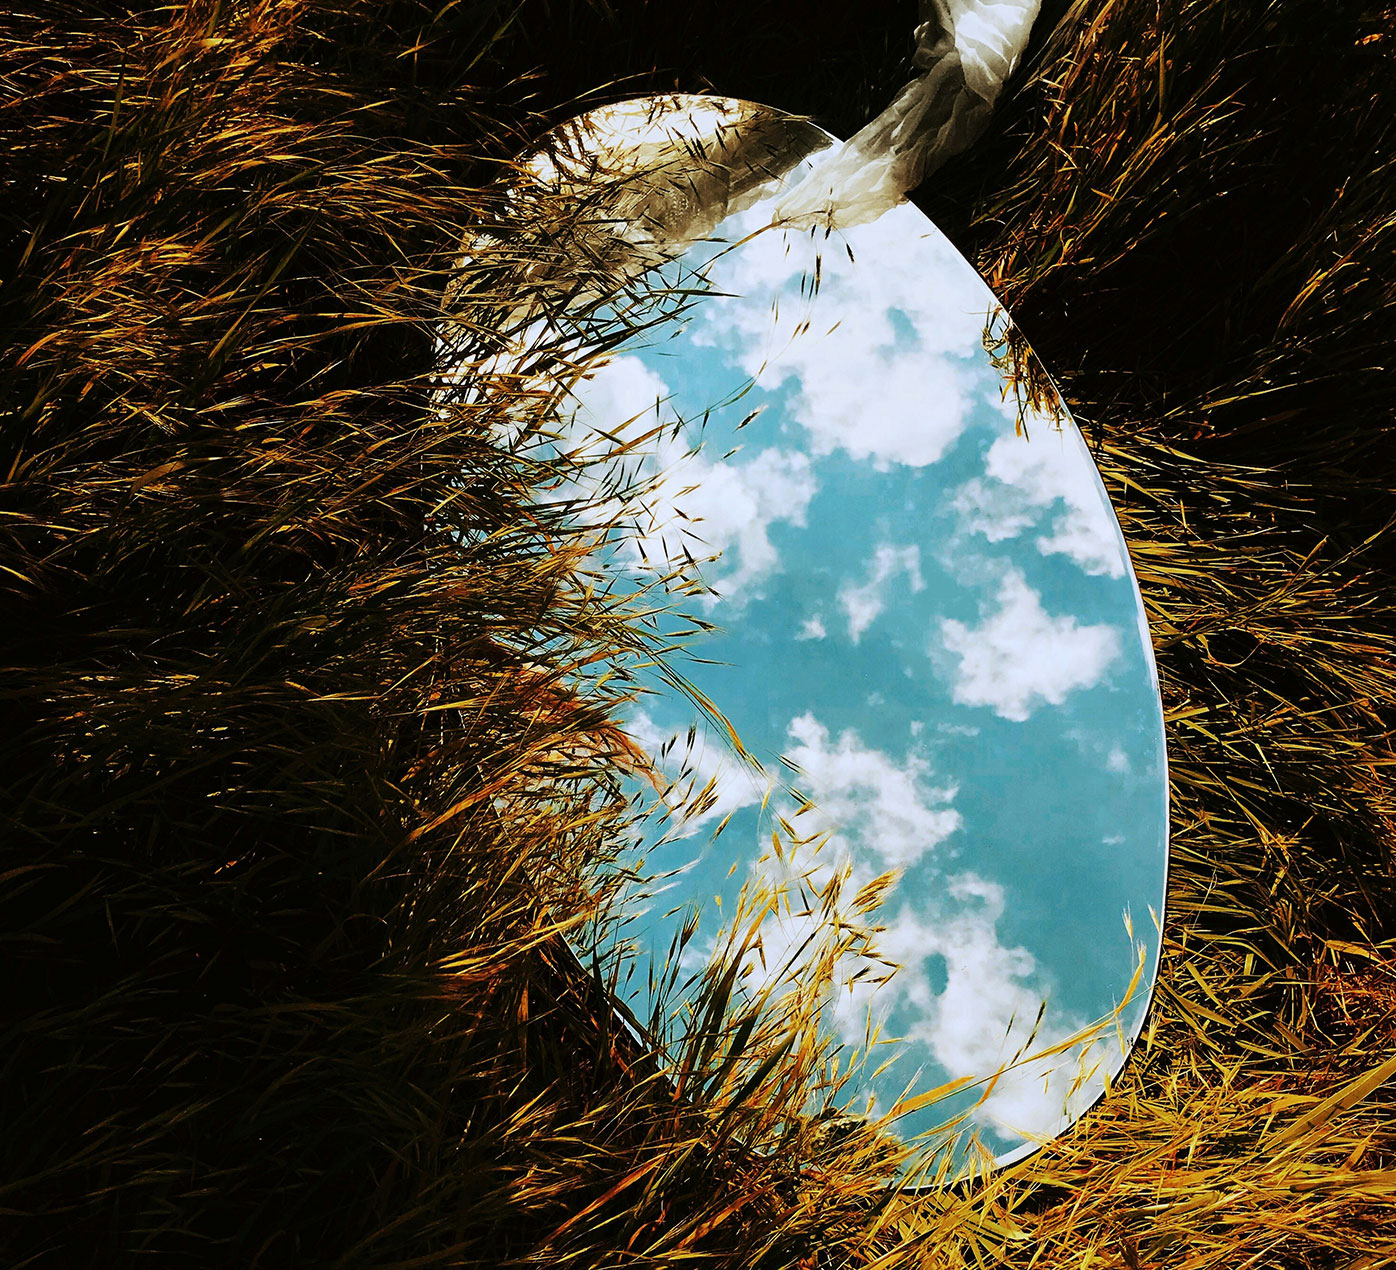 Mirror laying in the grass reflecting the sky